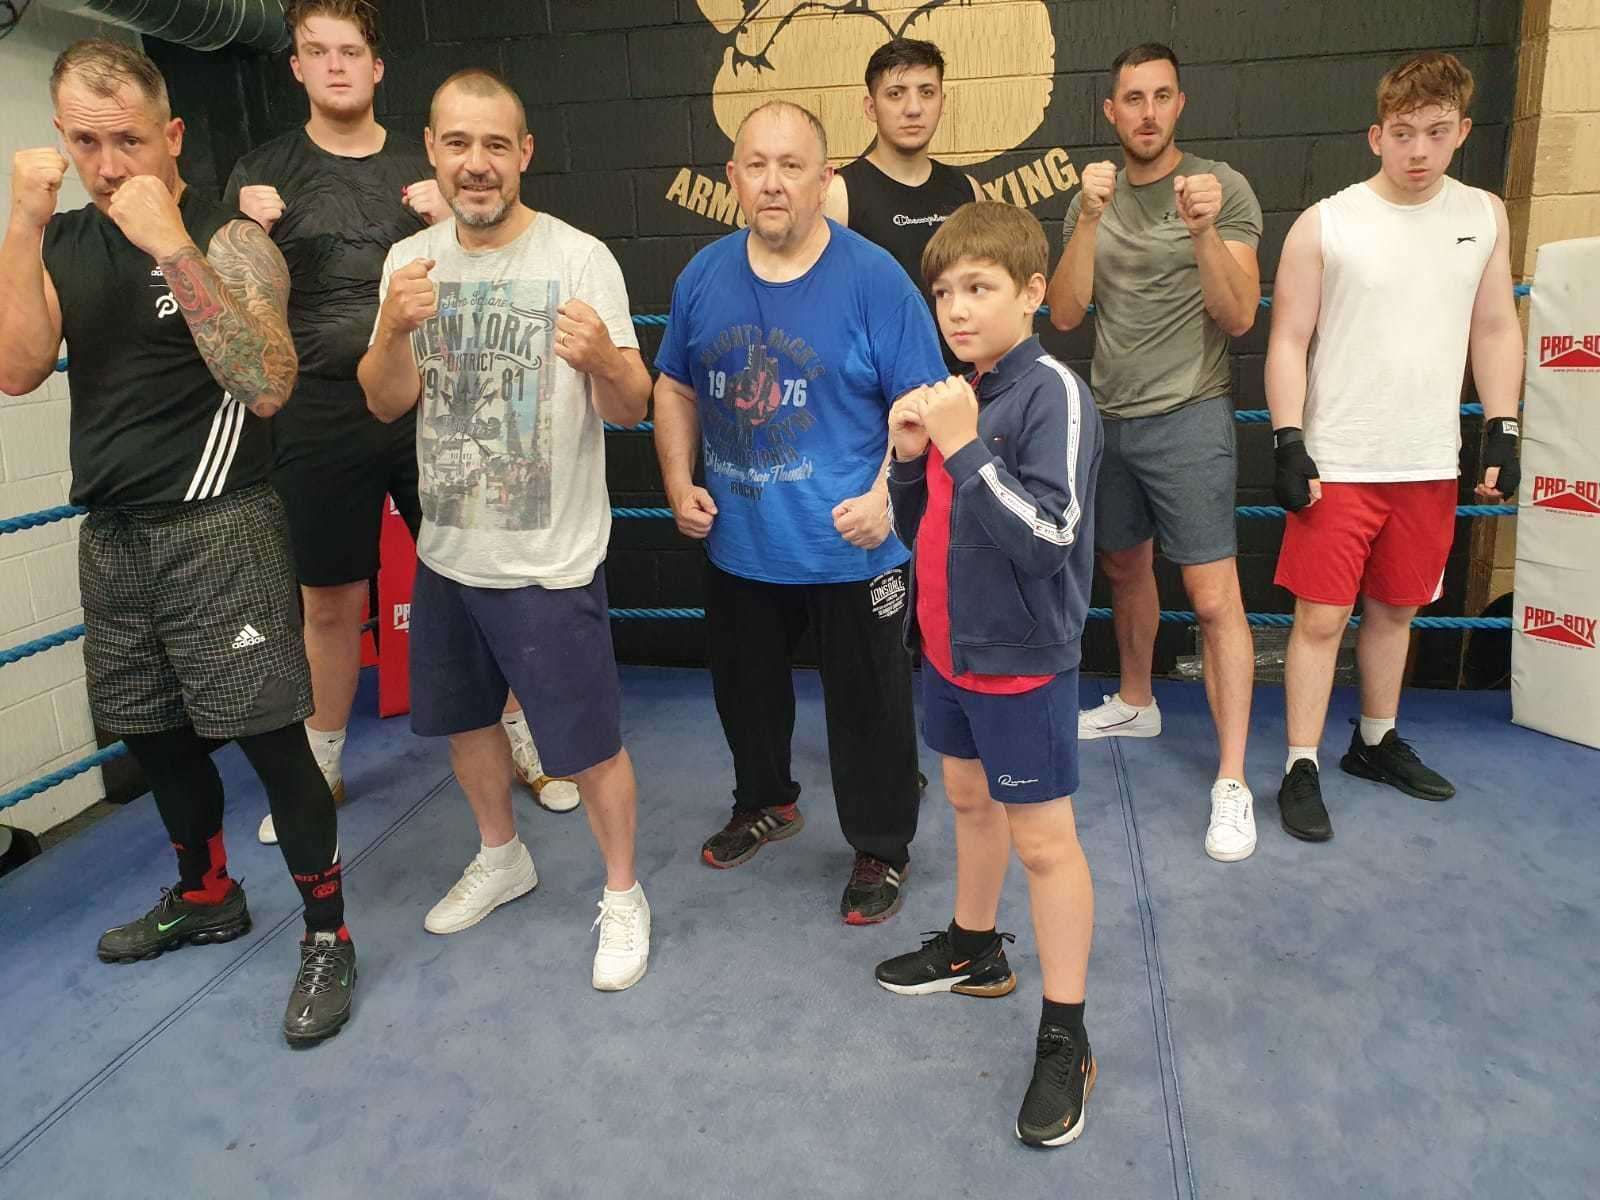 Boxers at Johnny Armour's gym in Chatham